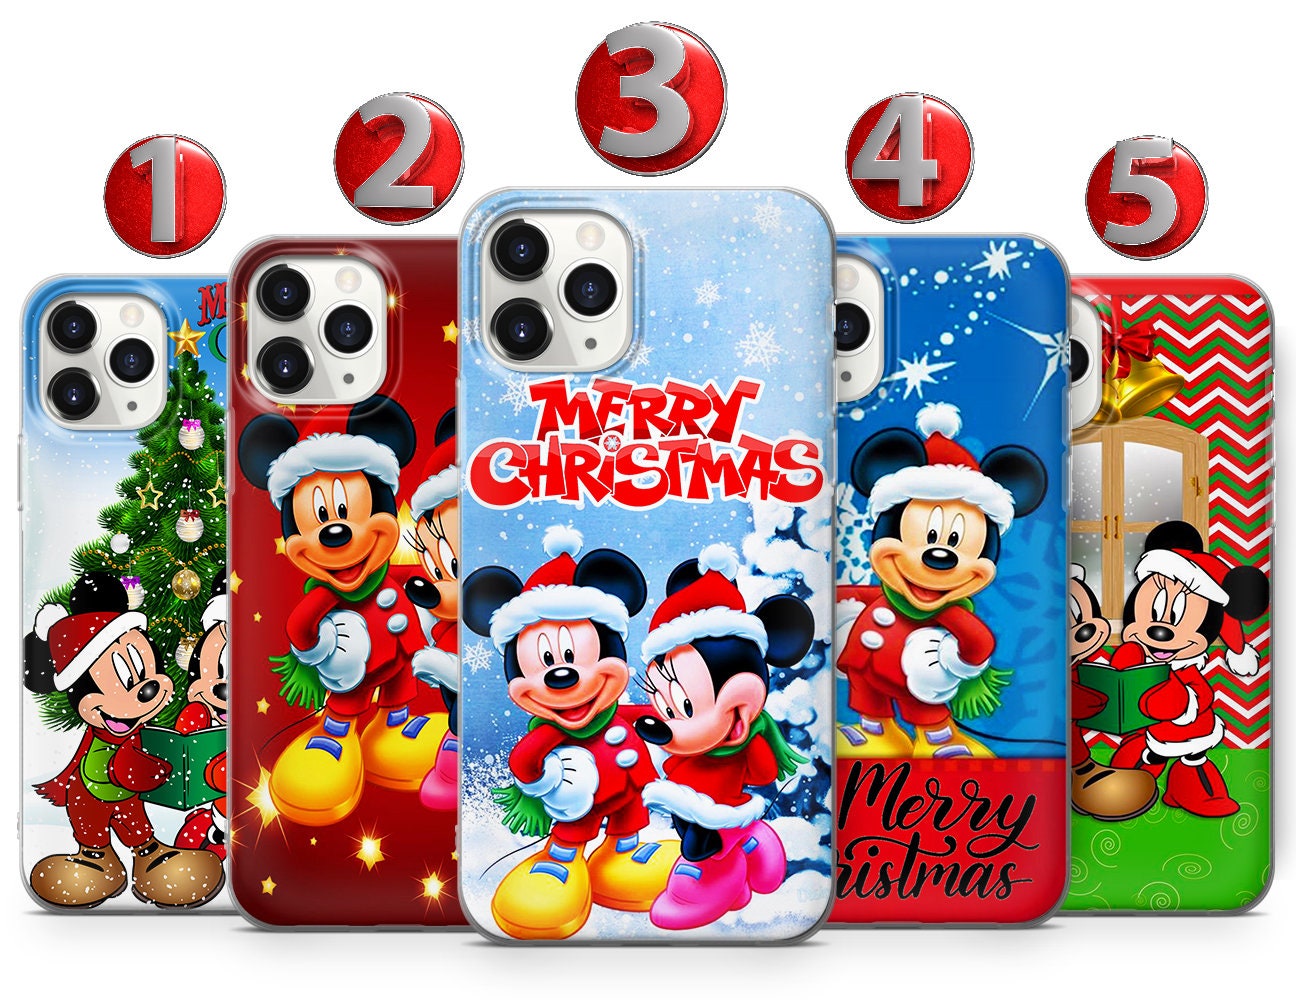  redecarie for iPhone 14 Pro Case,Minnie Mickey Mouse 3D Cute  Cartoon Soft Silicone PU Leather Wallet Card Holder Lanyard Women Girls  Kids Case Cover for iPhone 14 Pro 6.1 inch,Black 